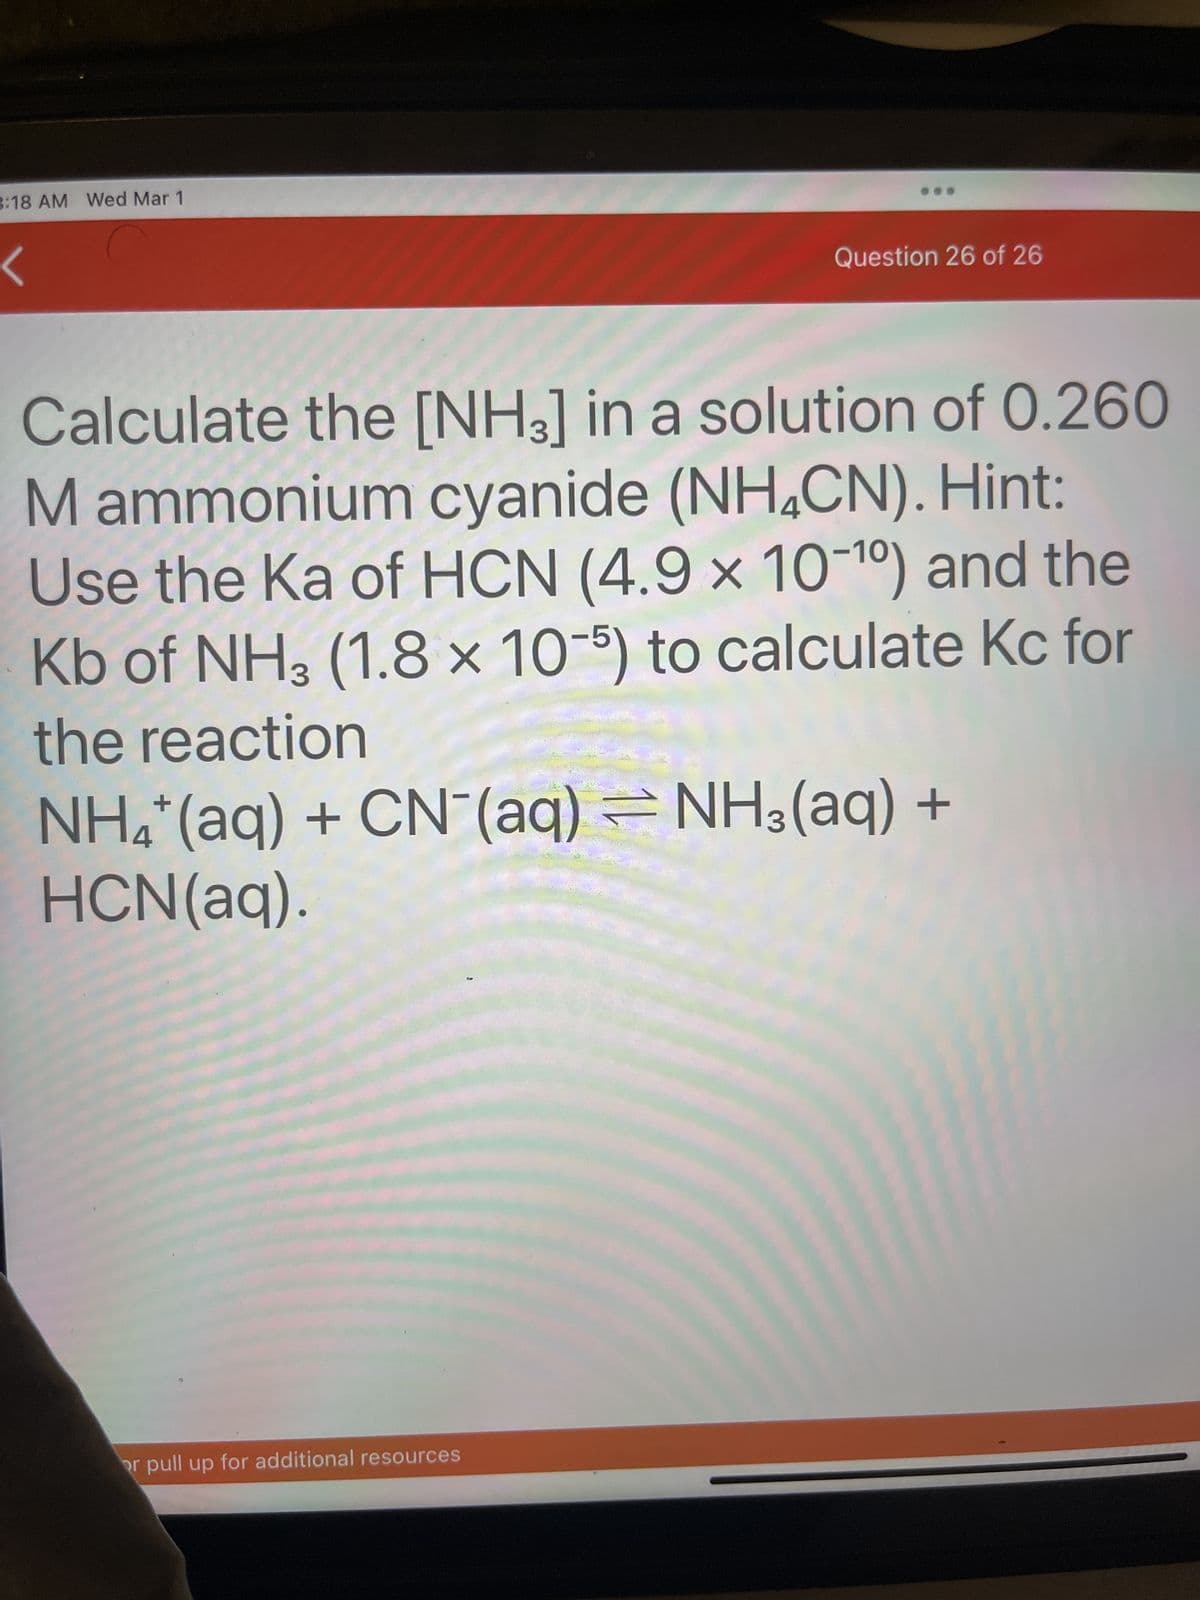 3:18 AM Wed Mar 1
Question 26 of 26
Calculate the [NH3] in a solution of 0.260
M ammonium cyanide (NH4CN). Hint:
Use the Ka of HCN (4.9 x 10-¹0) and the
Kb of NH3 (1.8 x 10-5) to calculate Kc for
the reaction
NH4+ (aq) + CN (aq) = NH3(aq) +
HCN(aq).
or pull up for additional resources